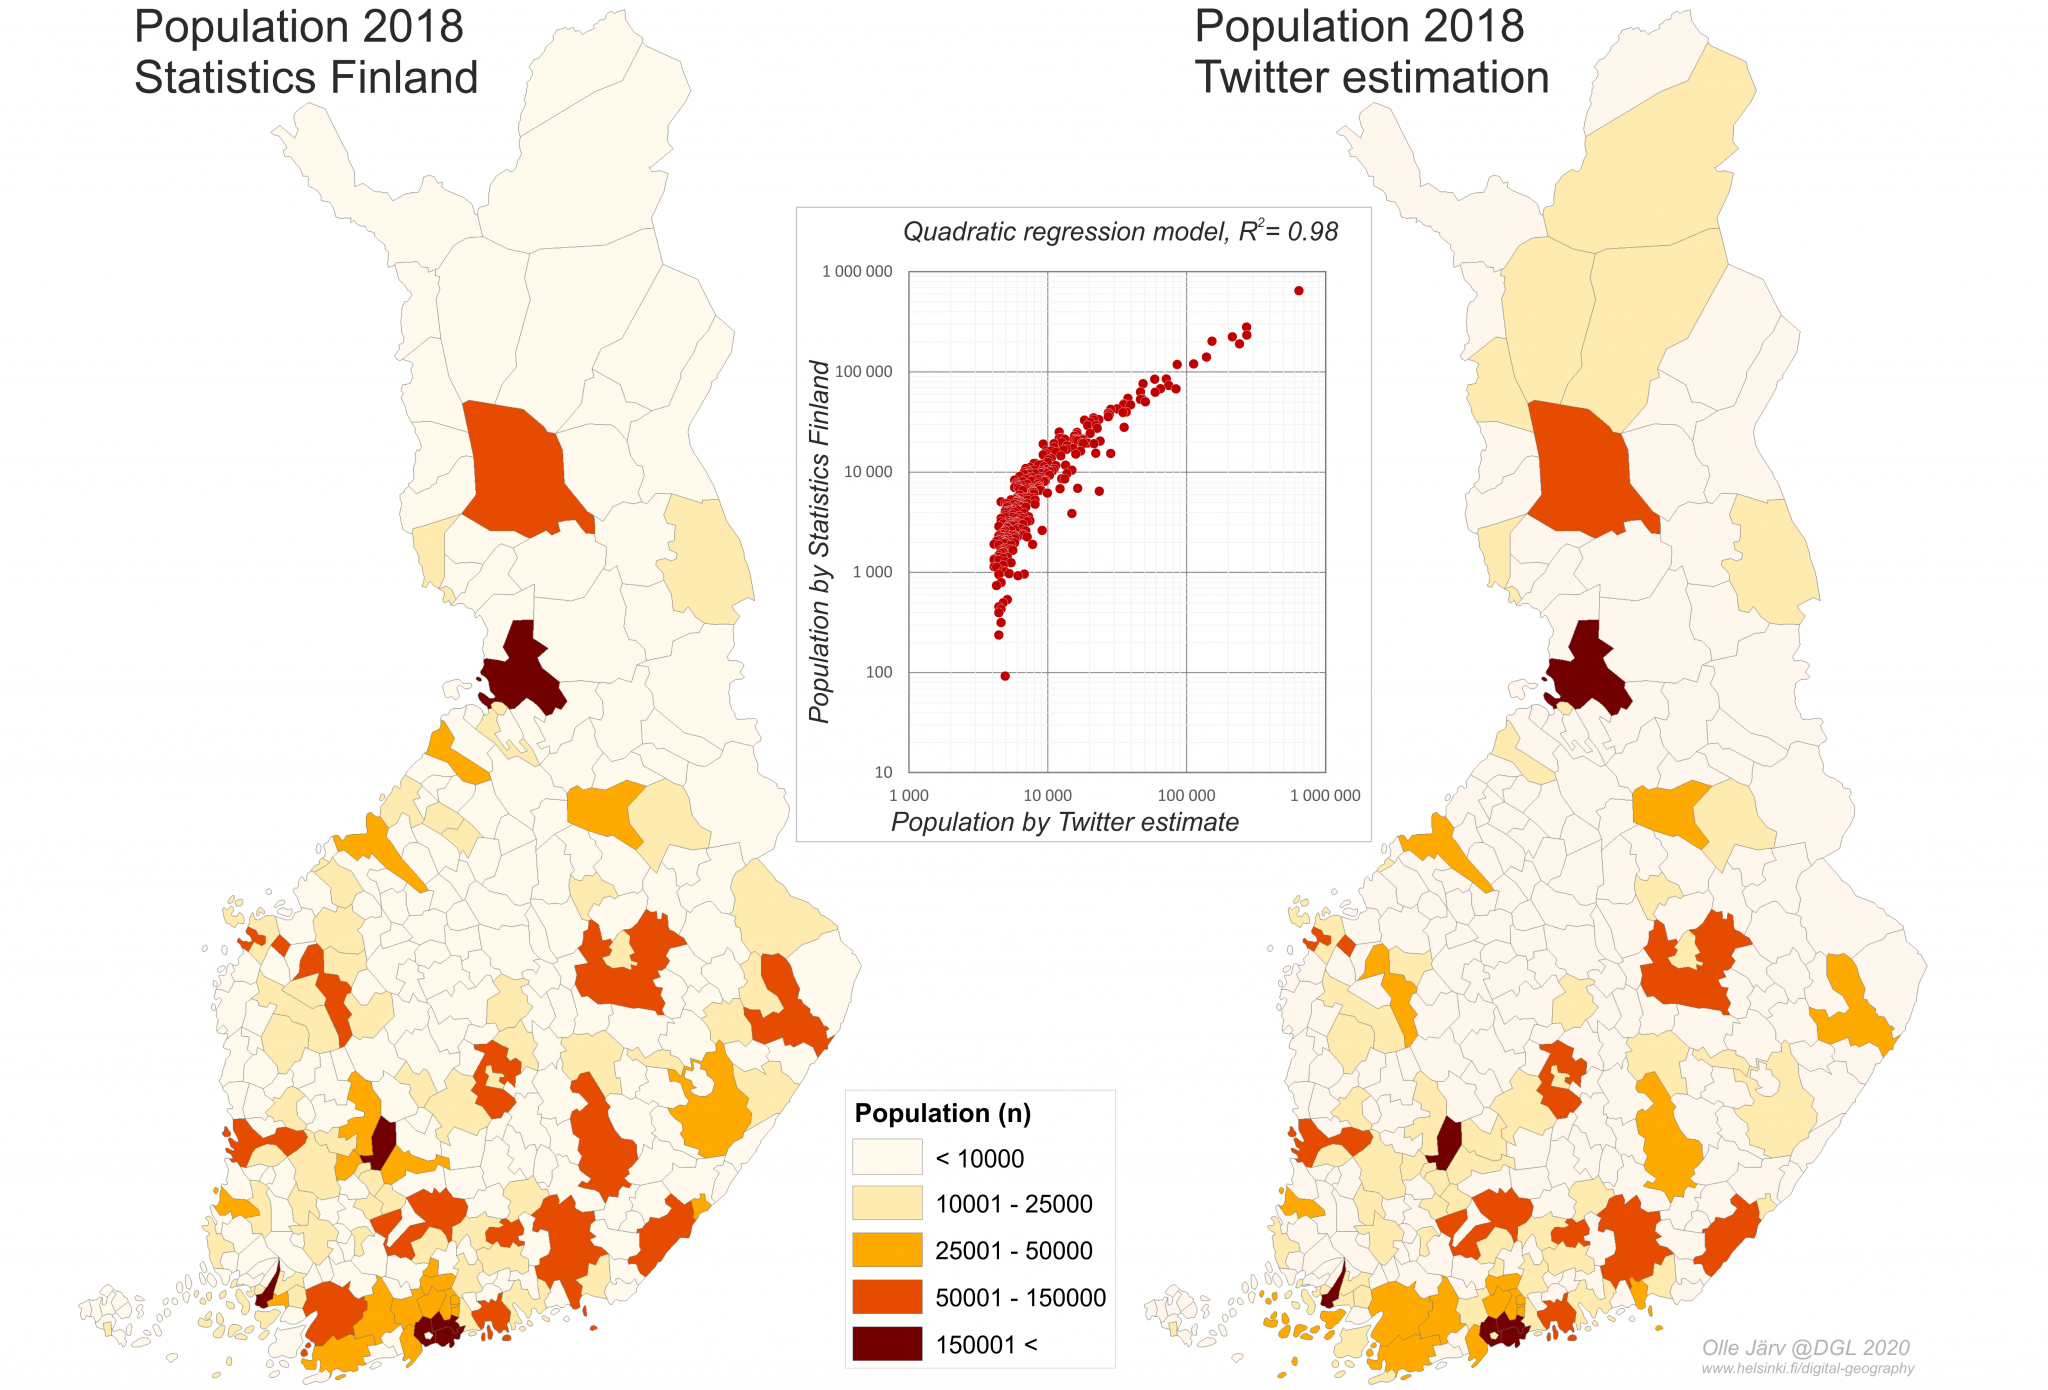 Can we use Twitter data to estimate population distribution in Finland